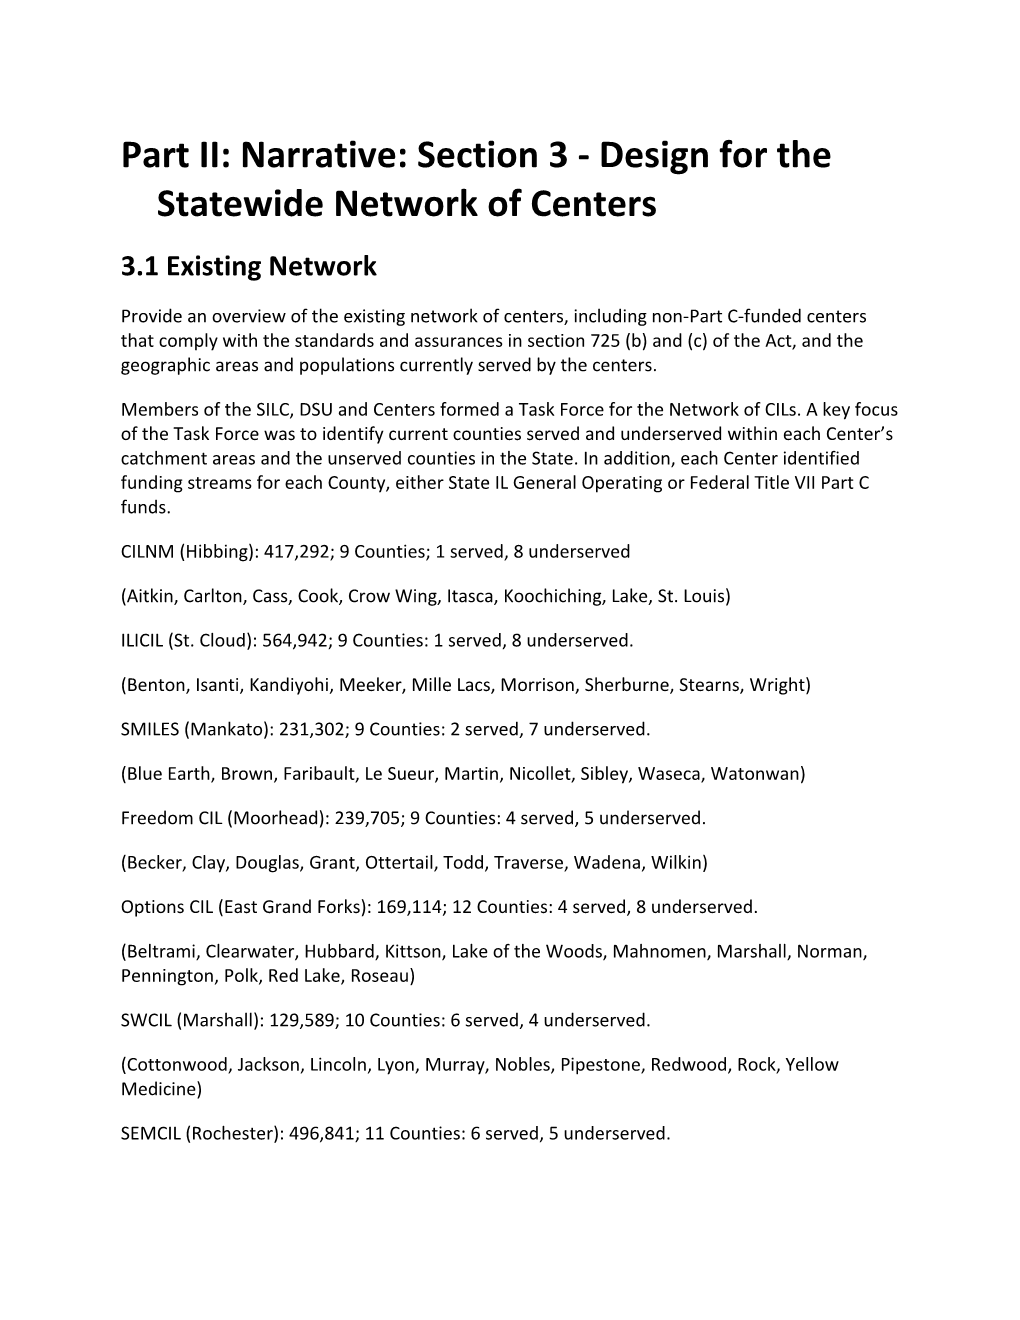 Part II: Narrative: Section 3 - Design for the Statewide Network of Centers